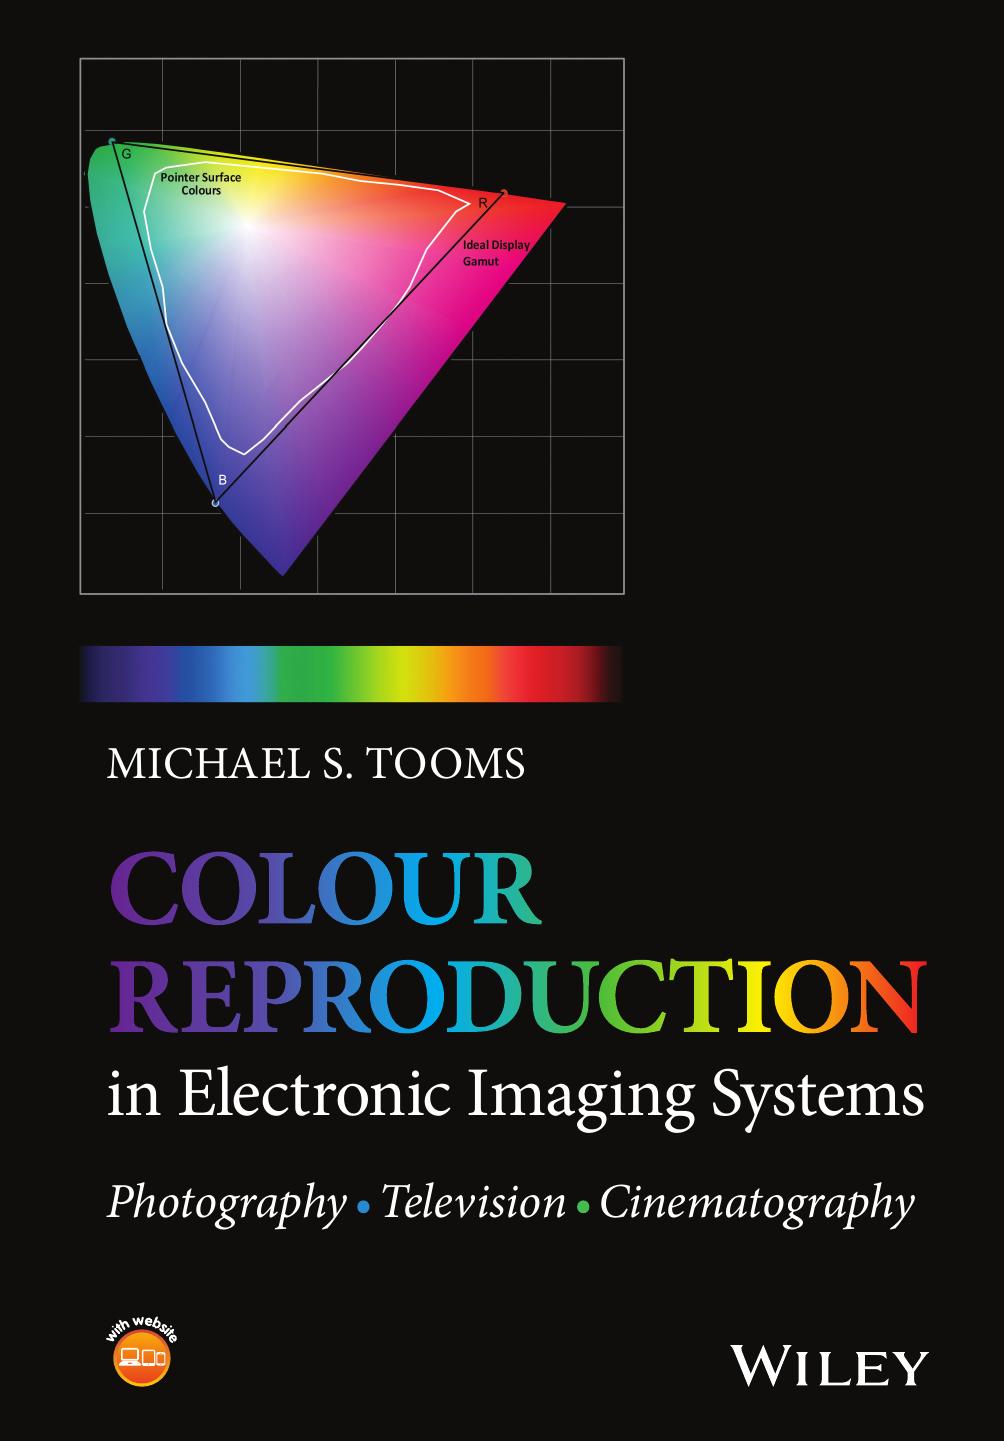 COLOUR REPRODUCTION IN ELECTRONIC IMAGING SYSTEMS: PHOTOGRAPHY, TELEVISION, CINEMATOGRAPHY